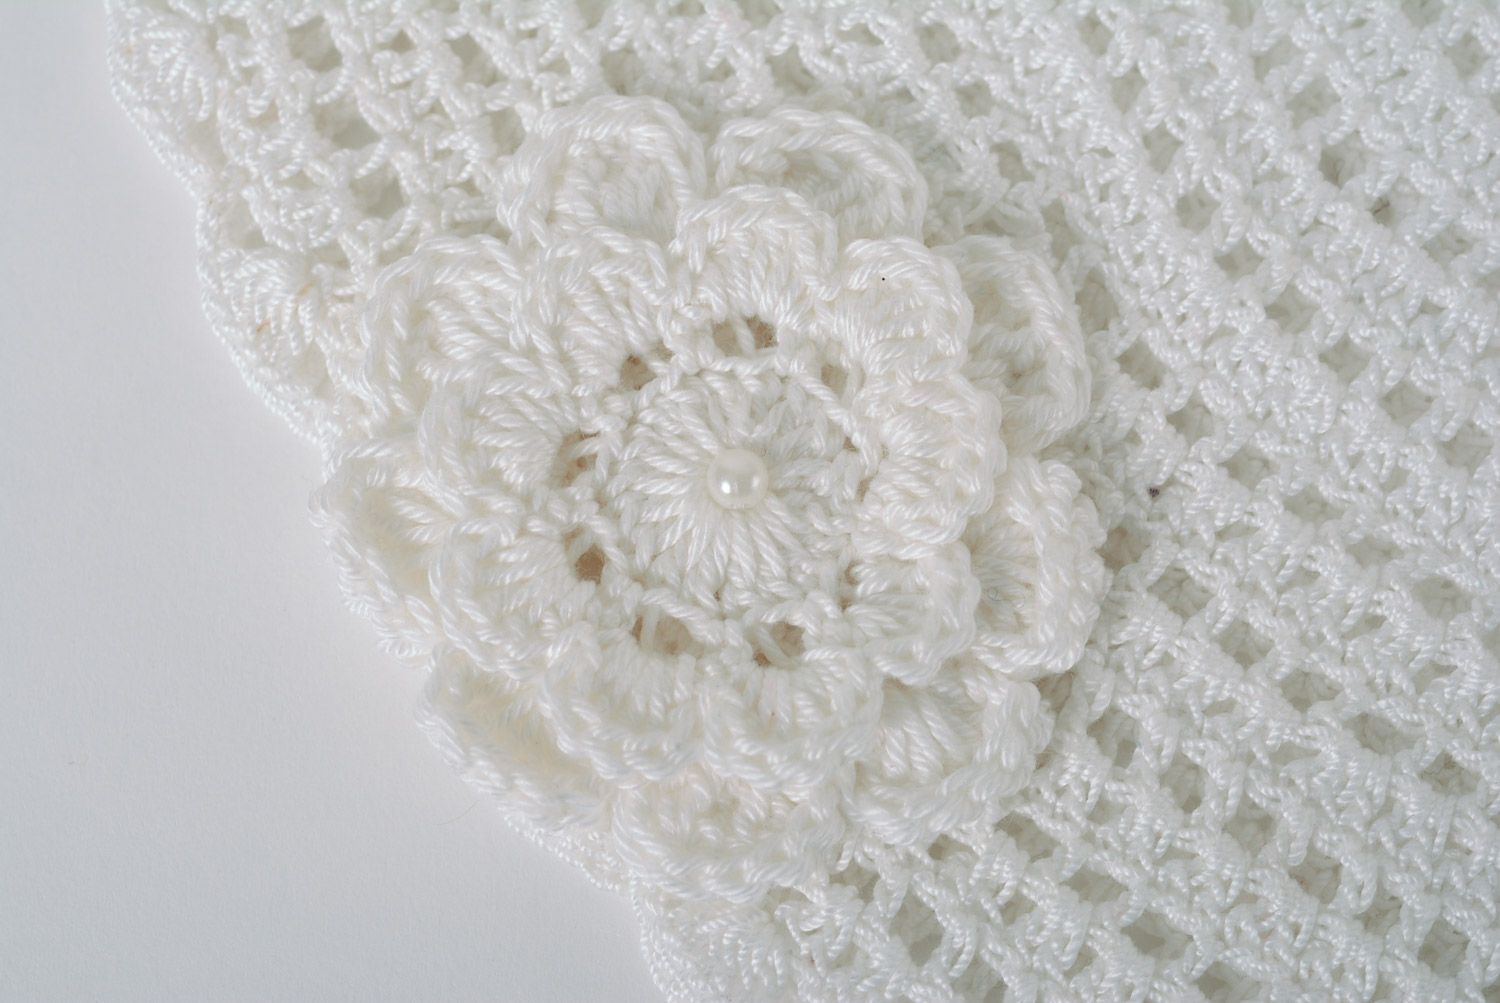 Handmade white lacy hat crocheted of cotton threads with flowers and beads photo 2